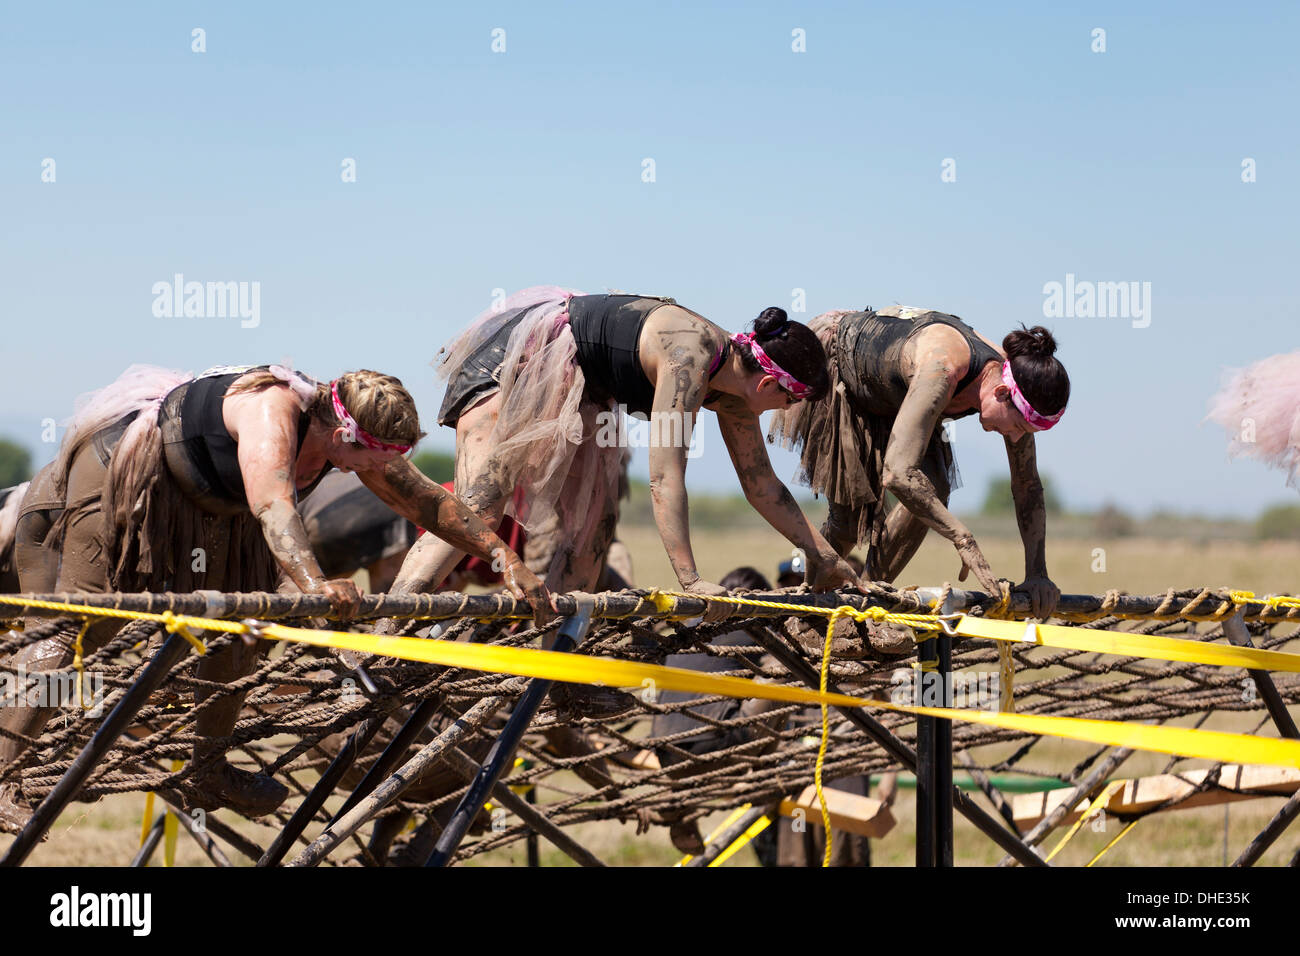 Female mud runners on obstacle course - California USA Stock Photo